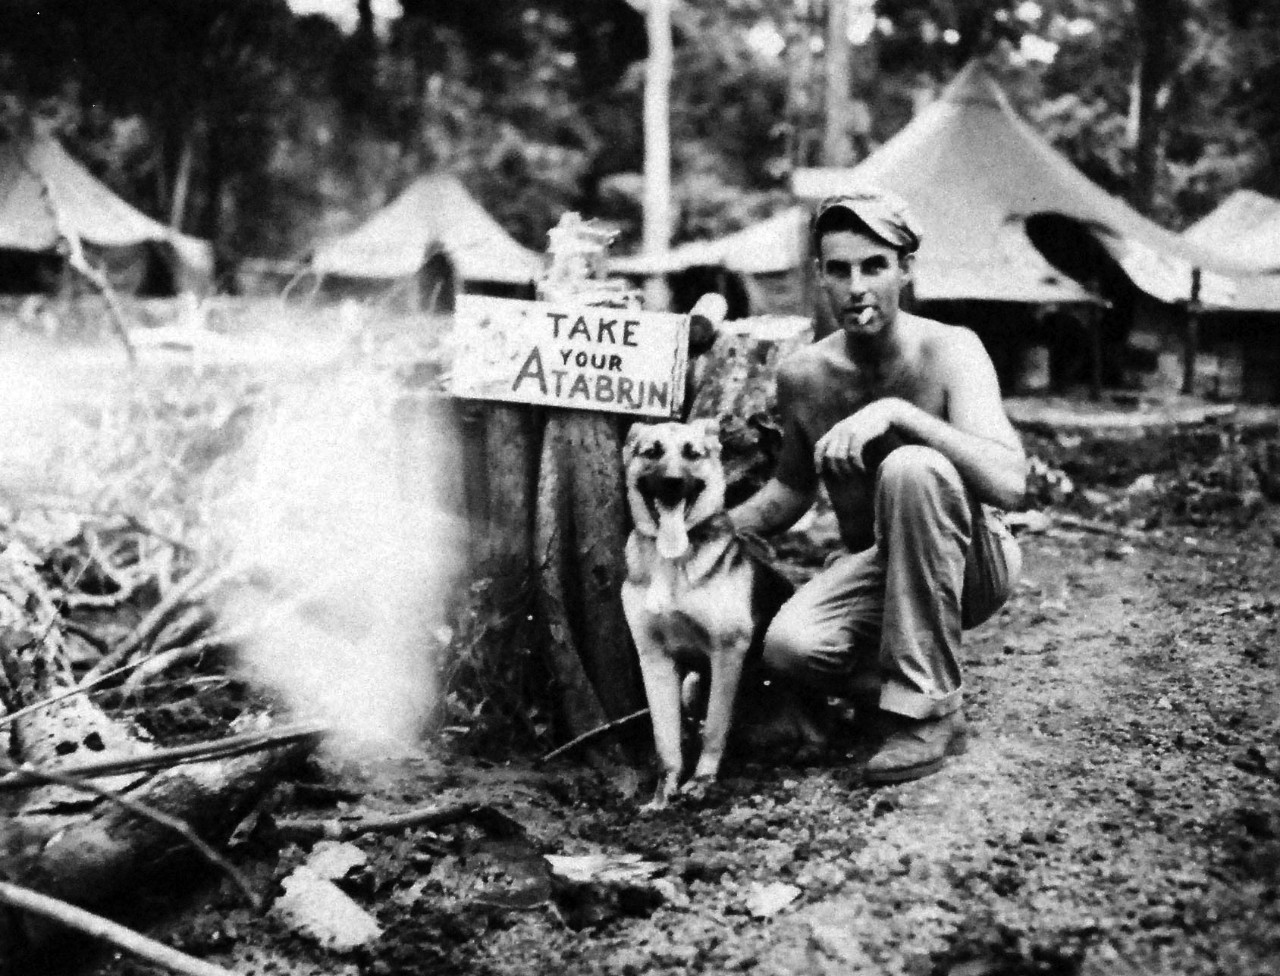 127-GW-966-77356: Battle of Cape Gloucester, New Britain, December 1943-January 1944. “Japanese sentry who joined Marines.” “Nipper,” a Japanese sentry dog, who voluntarily joined the Marines on Cape Glouchester, poses with Marine Master Technica...